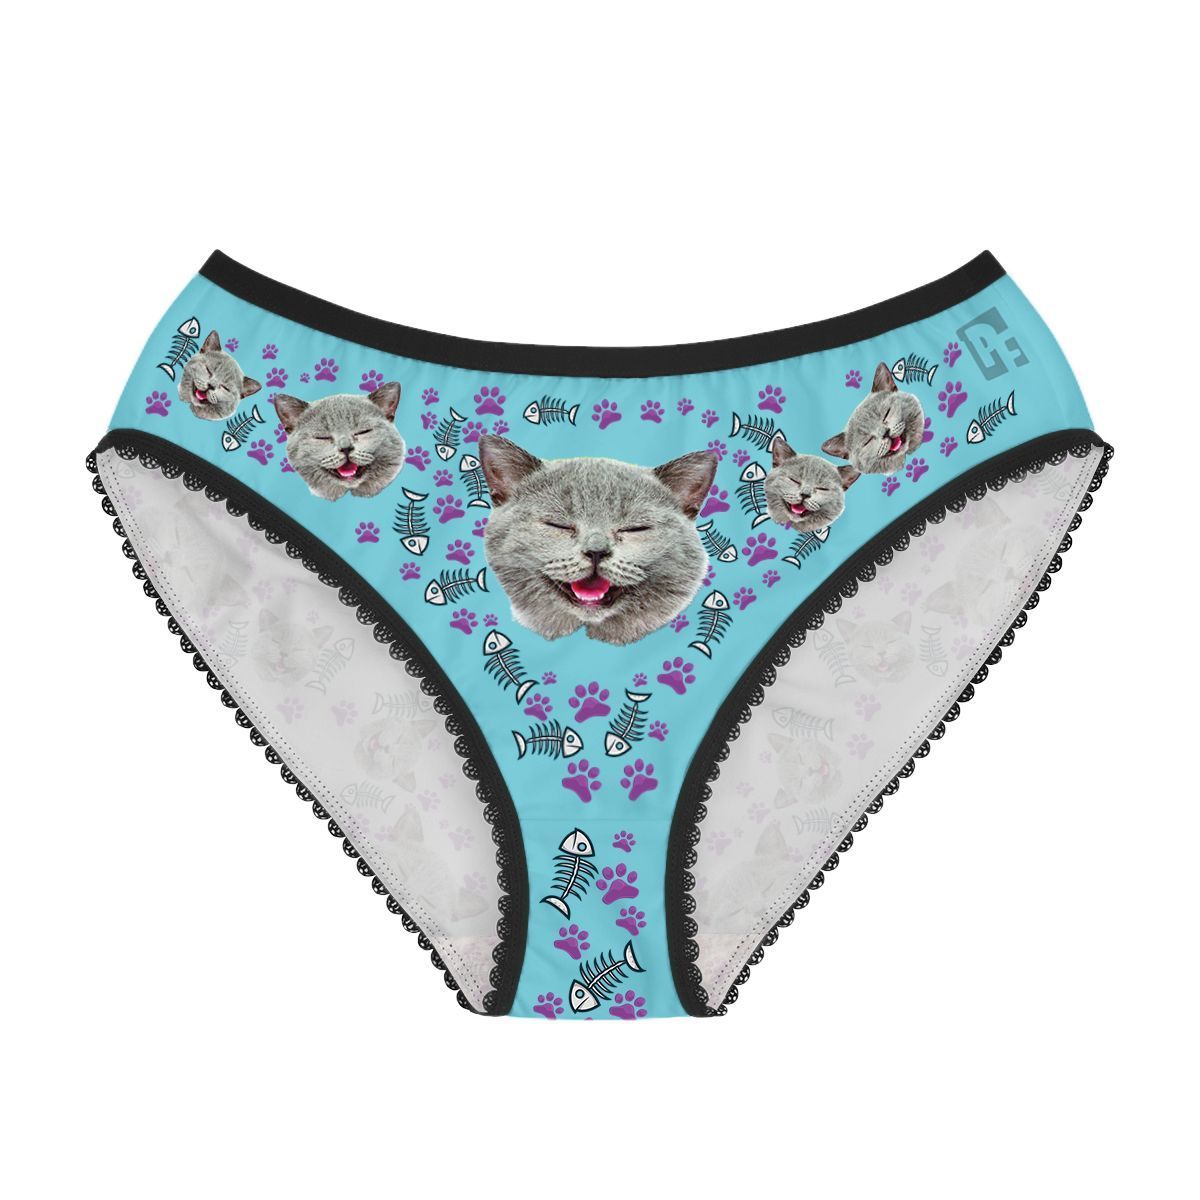 Blue Cat women's underwear briefs personalized with photo printed on them